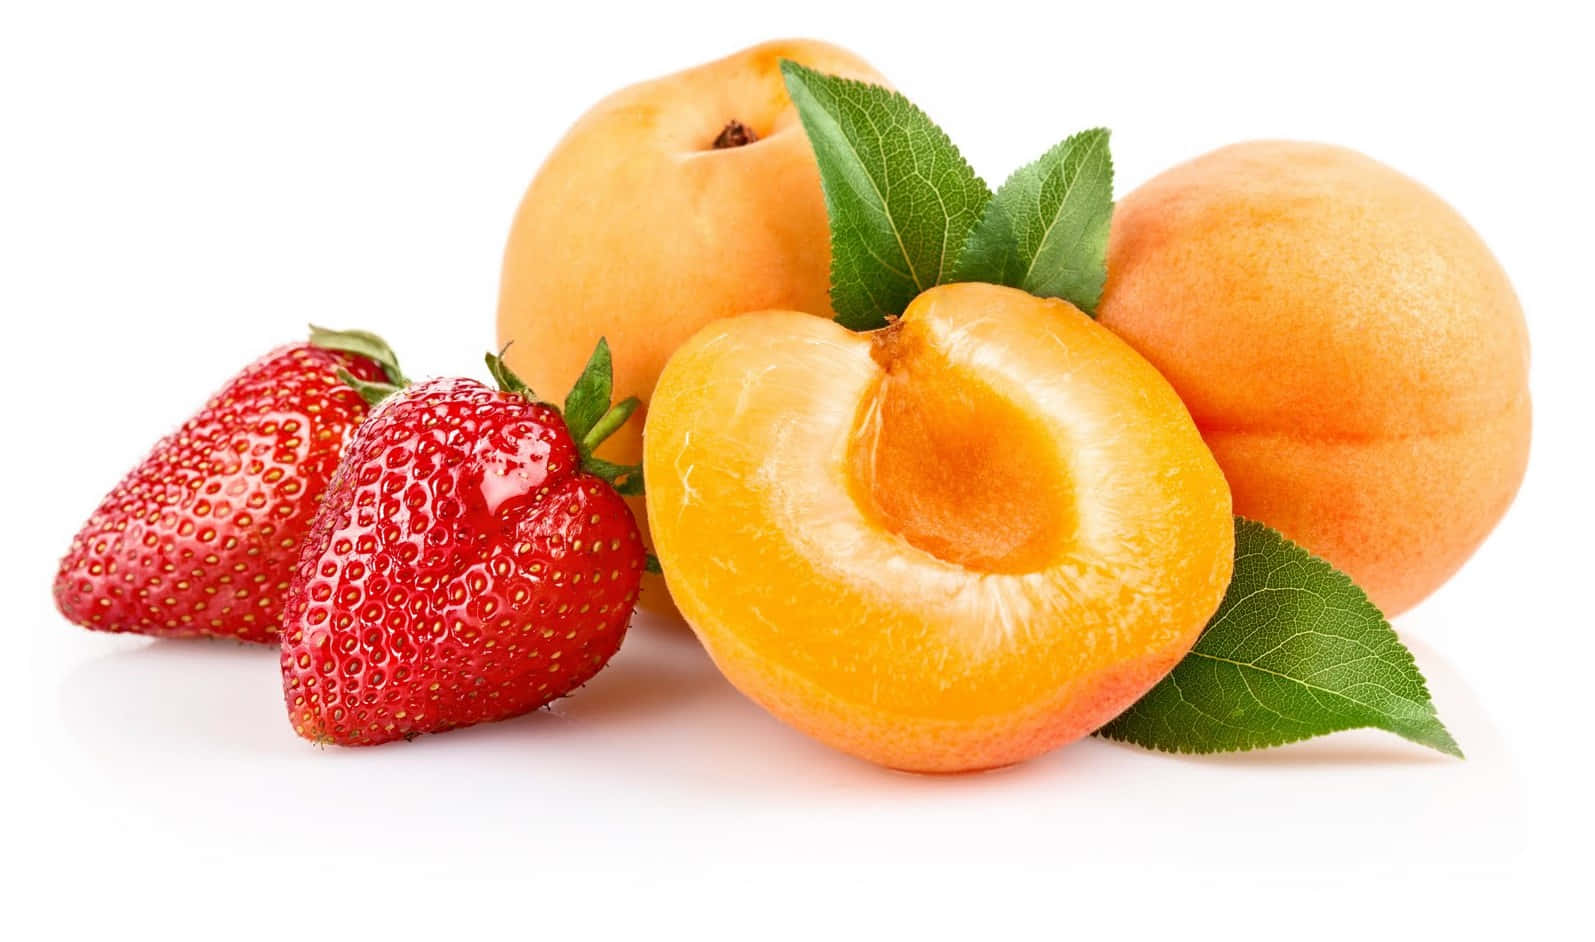 A playful arrangement of delectably fresh peaches and strawberries. Wallpaper